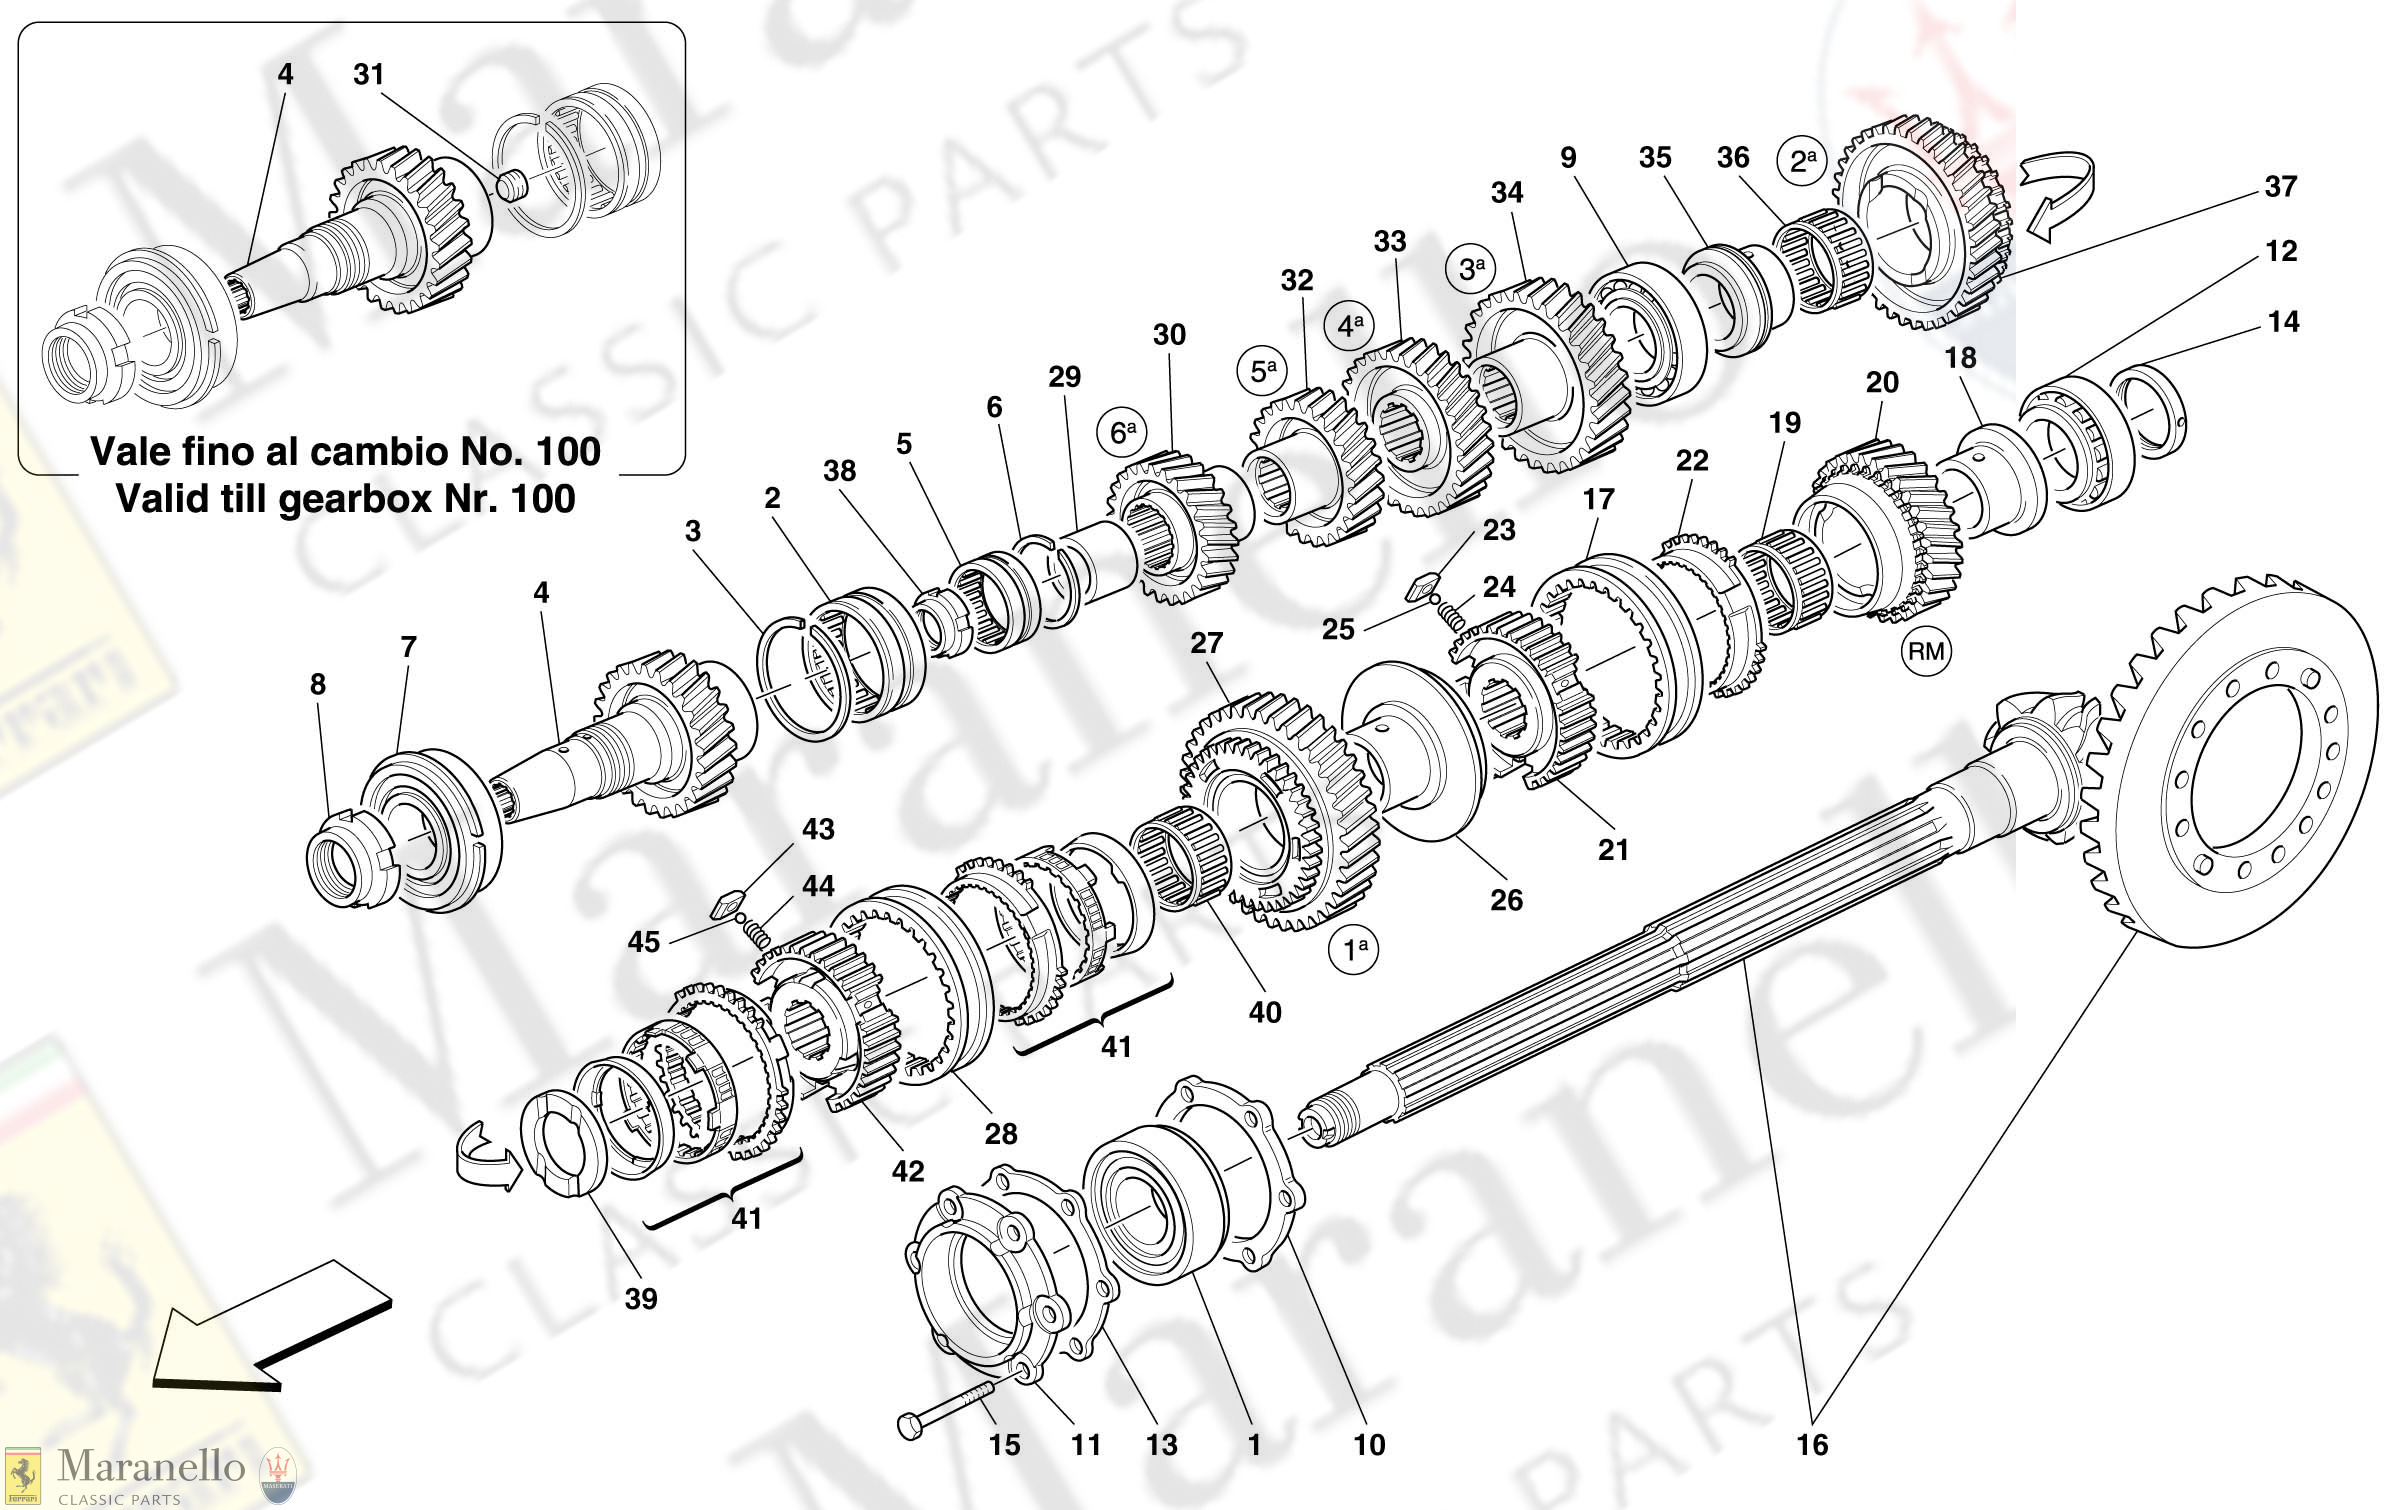 036 - Lay Shaft Gears -Not For 456M Gta-